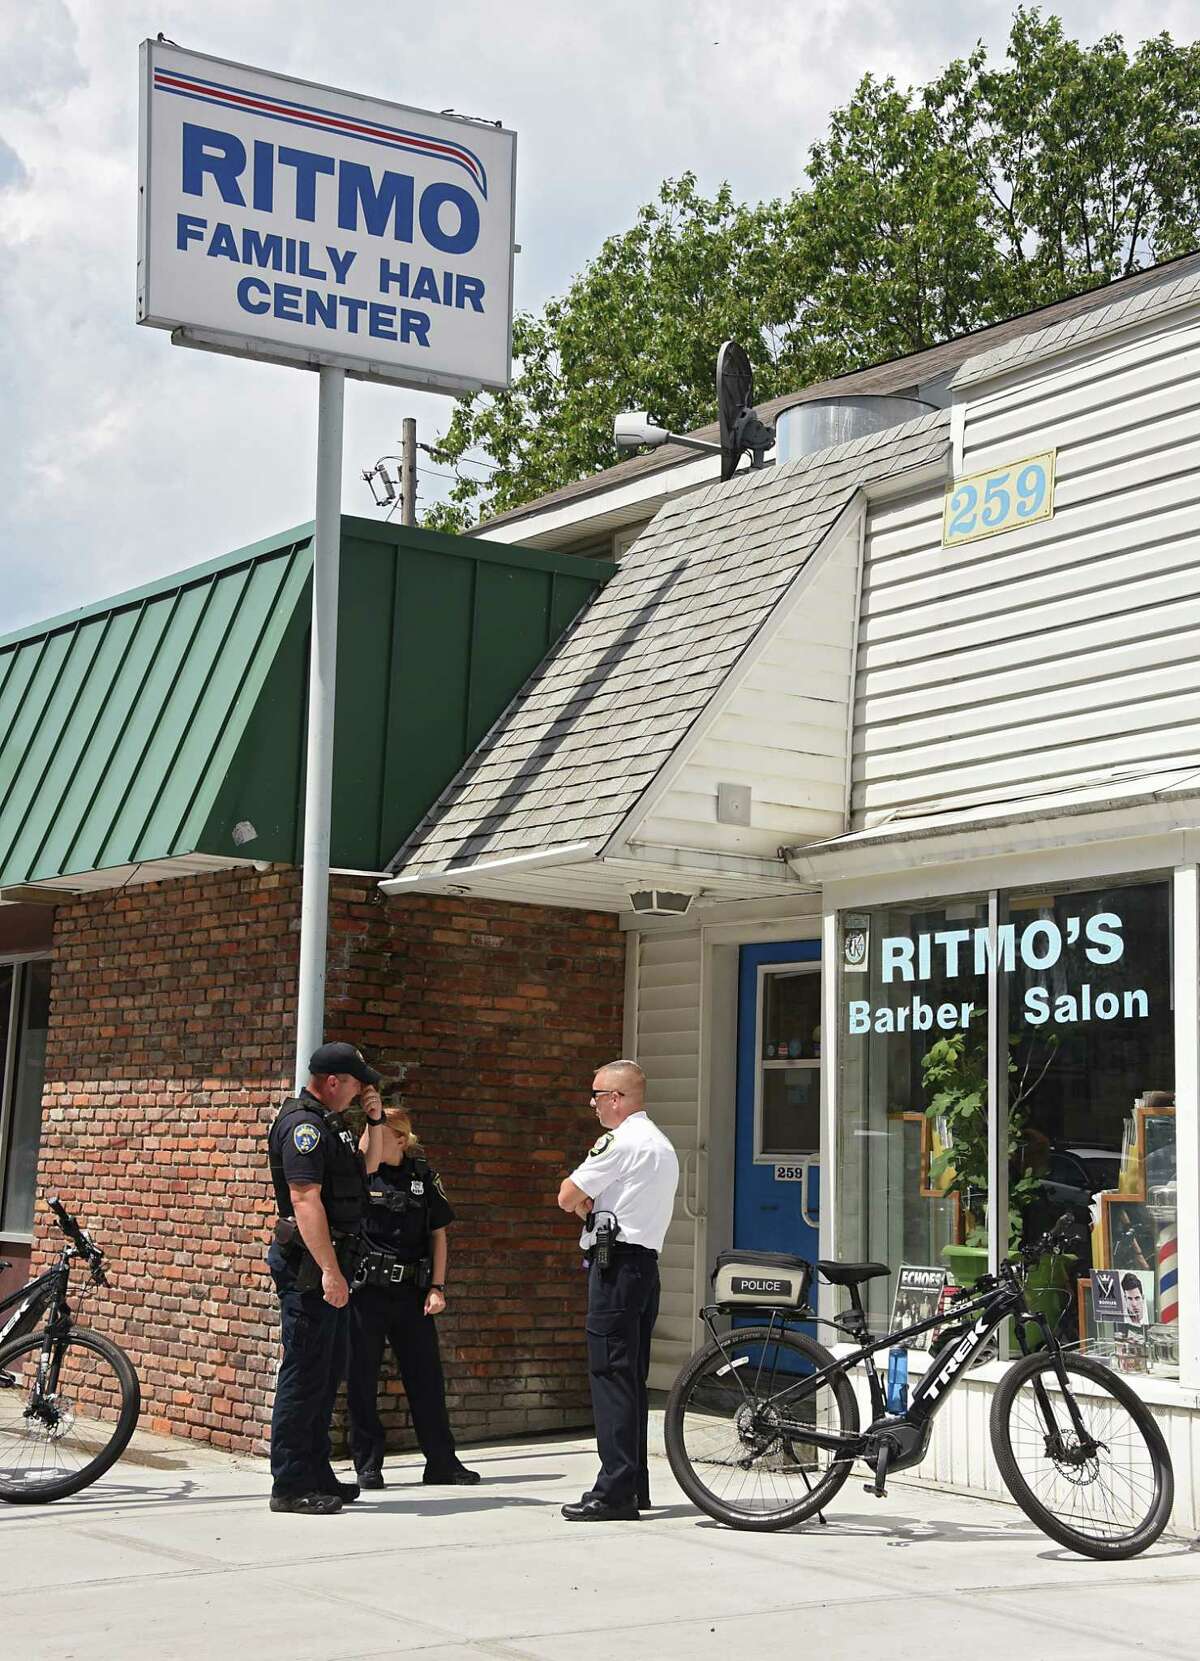 Police investigate the scene where two men armed with a gun took money from customers at Ritmo's Barber Salon at 259 New Scotland Ave. on Thursday, Aug. 8, 2019 in Albany, N.Y. (Lori Van Buren/Times Union)